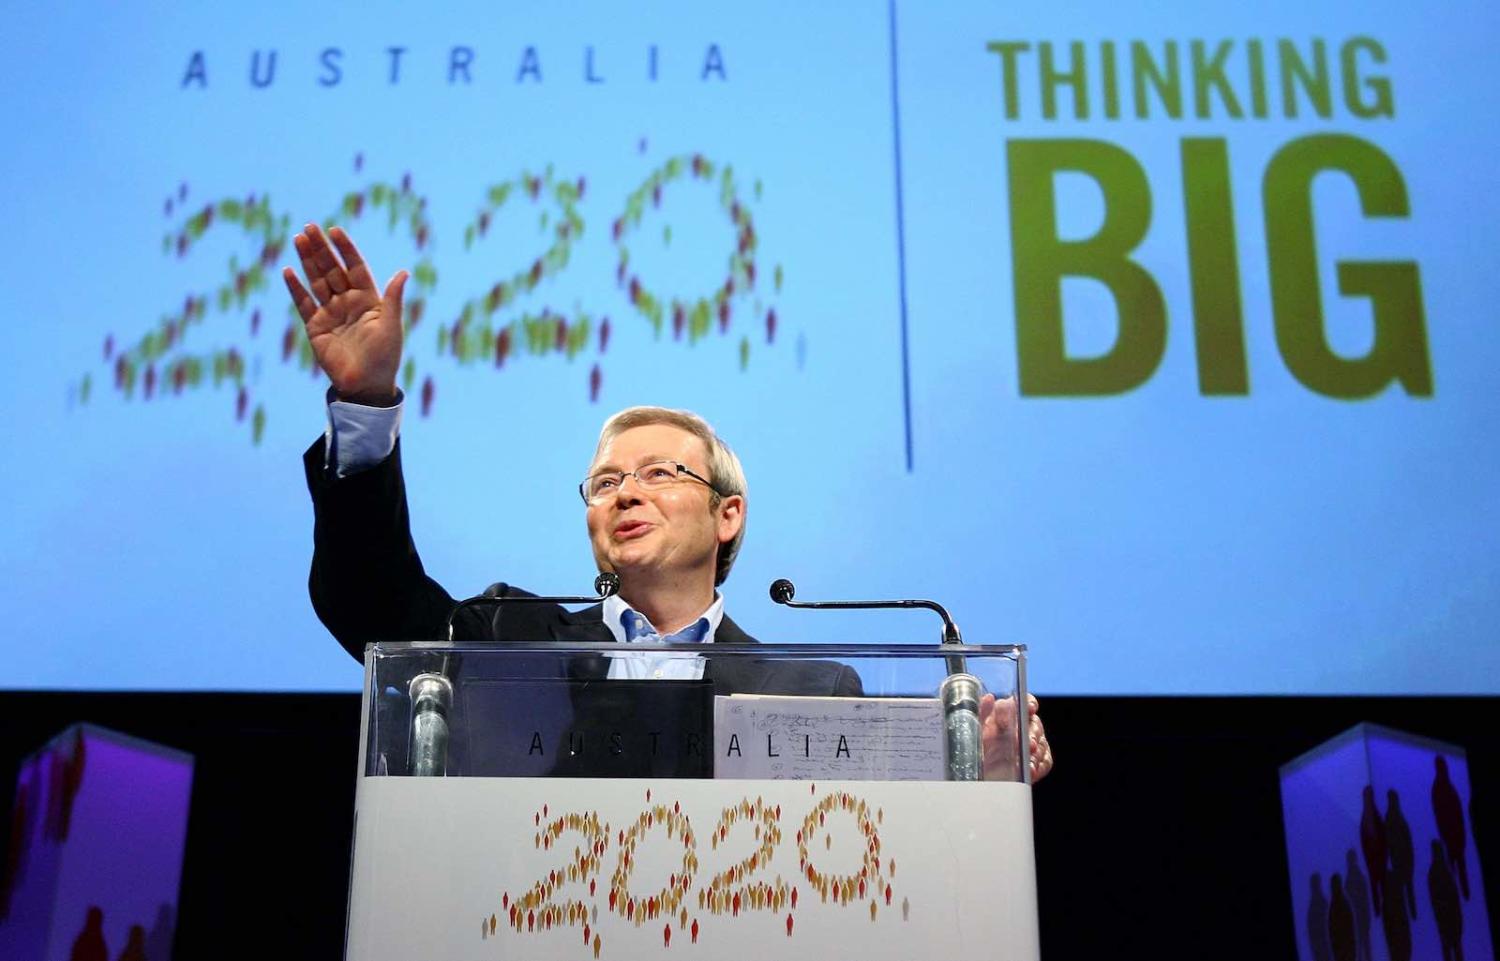 Kevin Rudd, then Prime Minister, opens day one of the Australia 2020 Summit held at Parliament House, Canberra, 19 April 2008 (Mark Nolan/Getty Images)